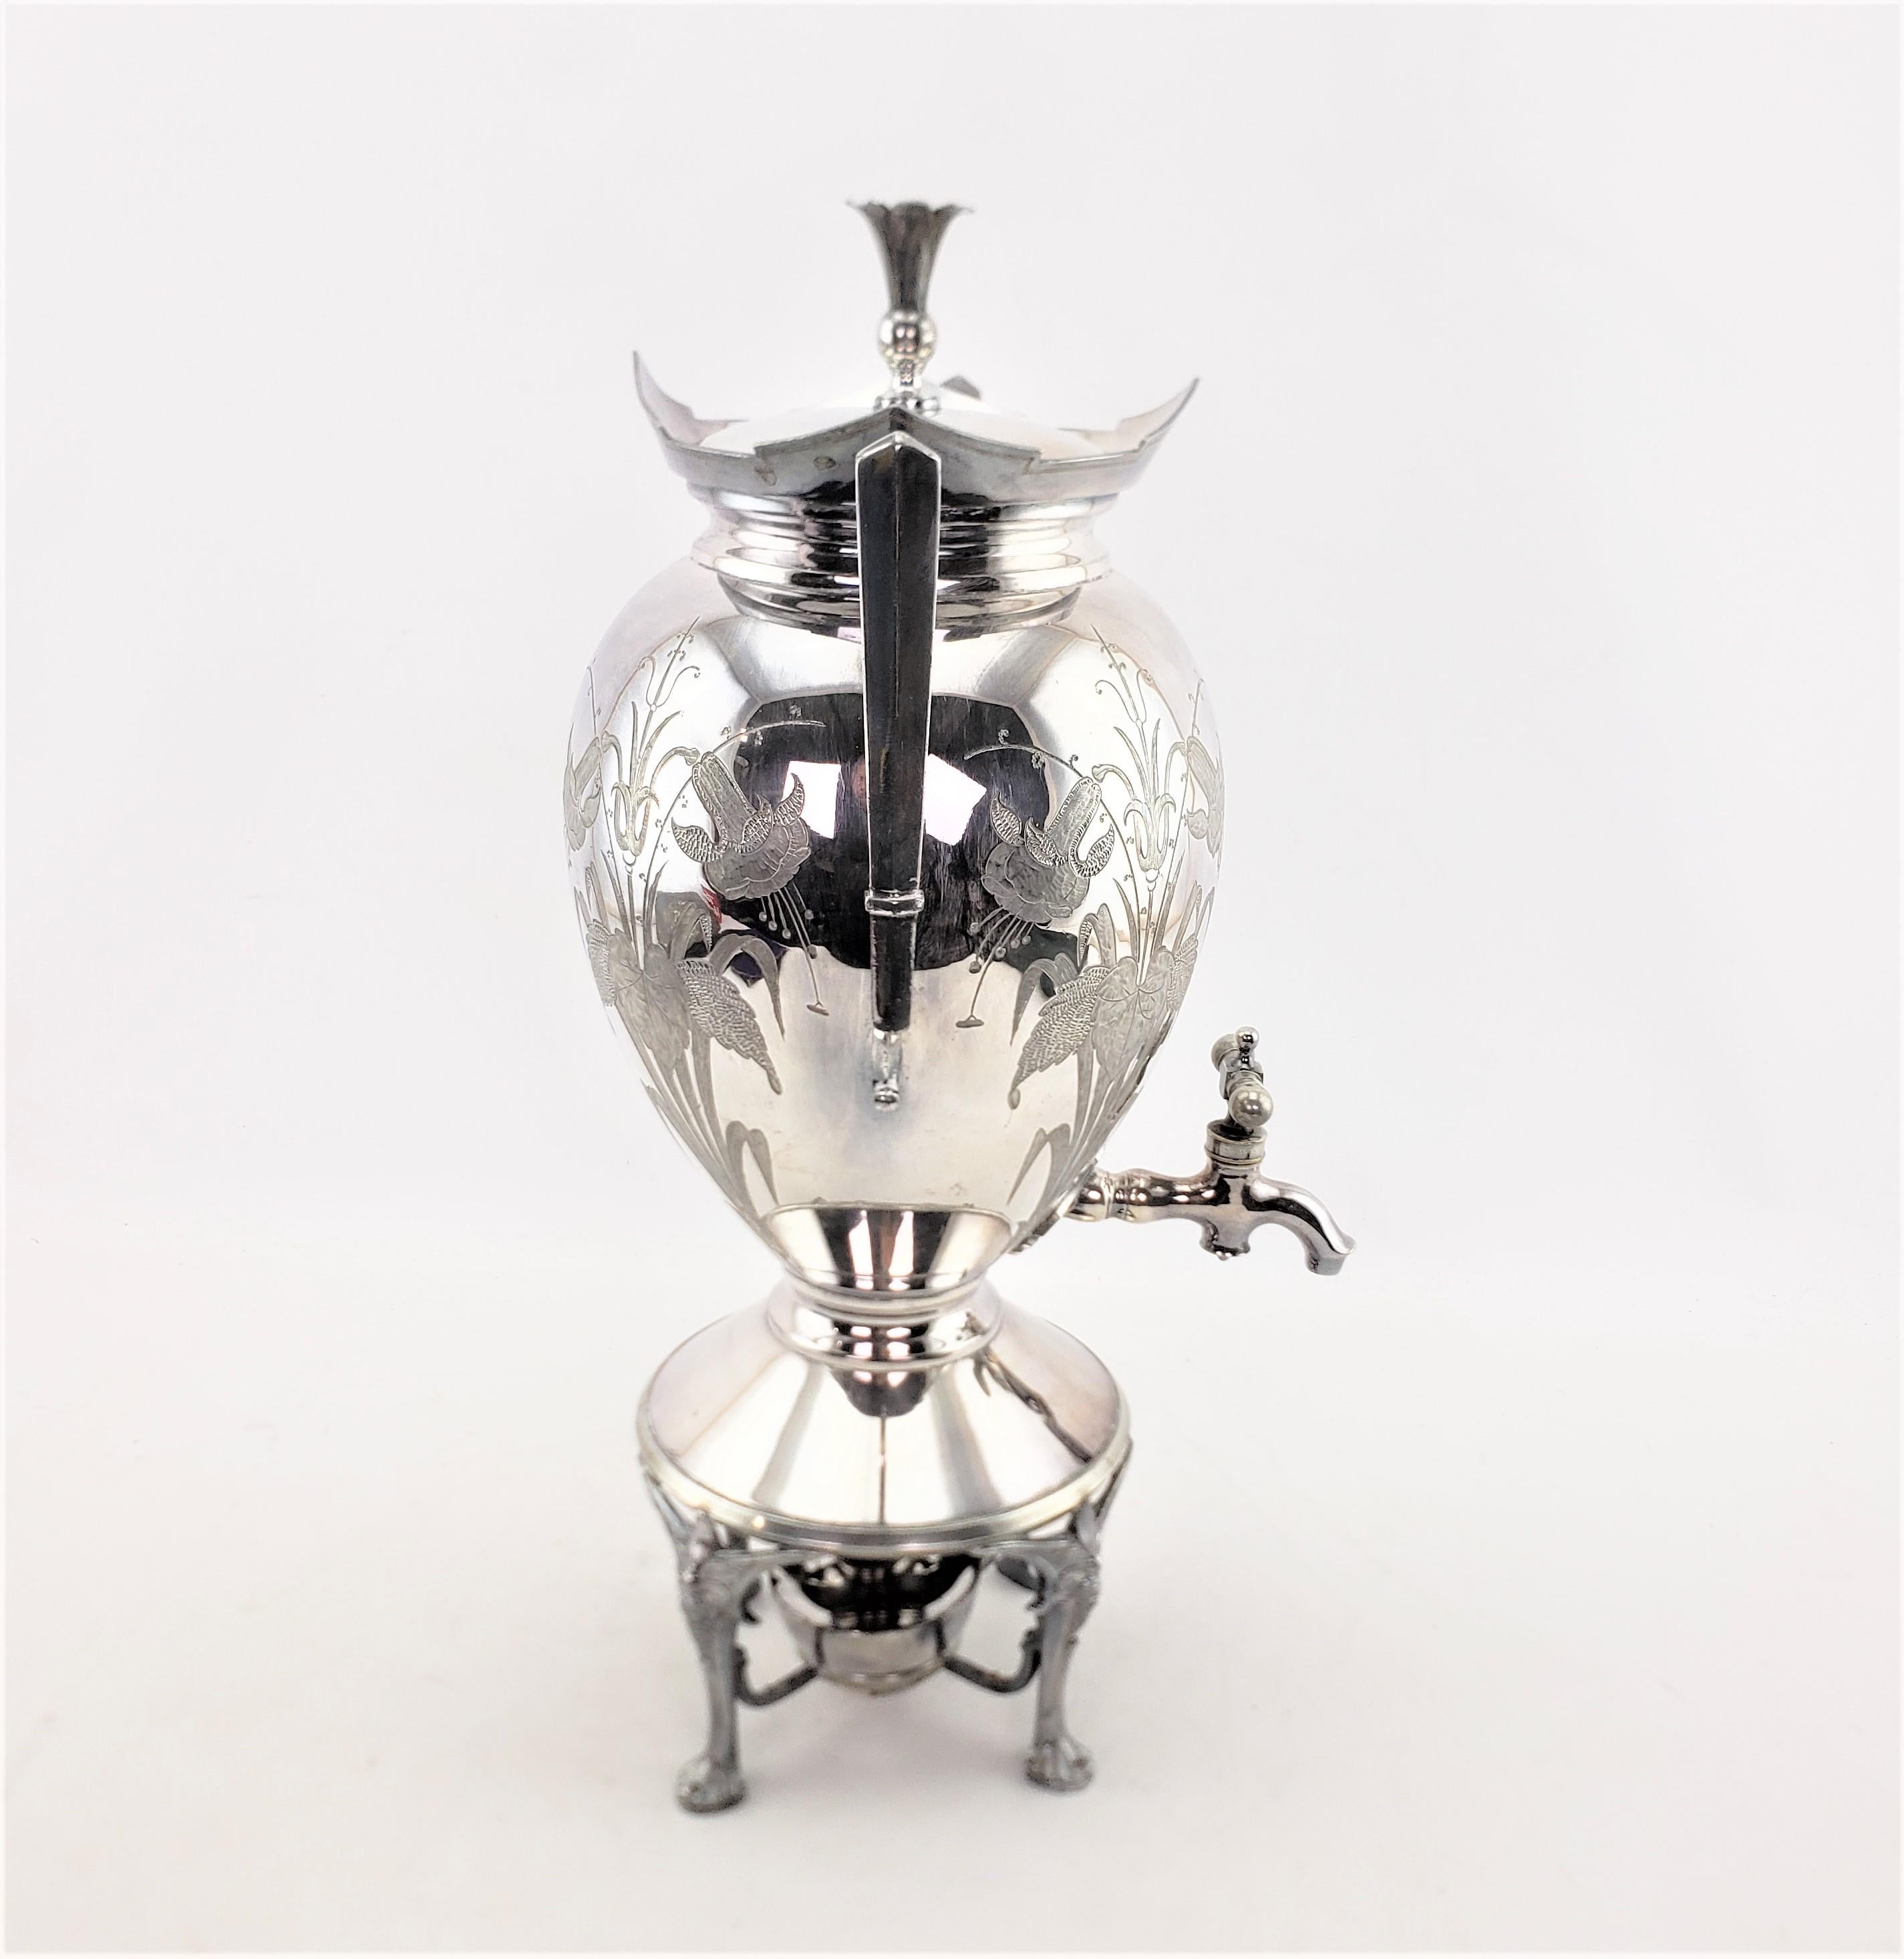 19th Century Antique Aesthetic Movement Silver Plated Hot Water Kettle with Floral Decoration For Sale